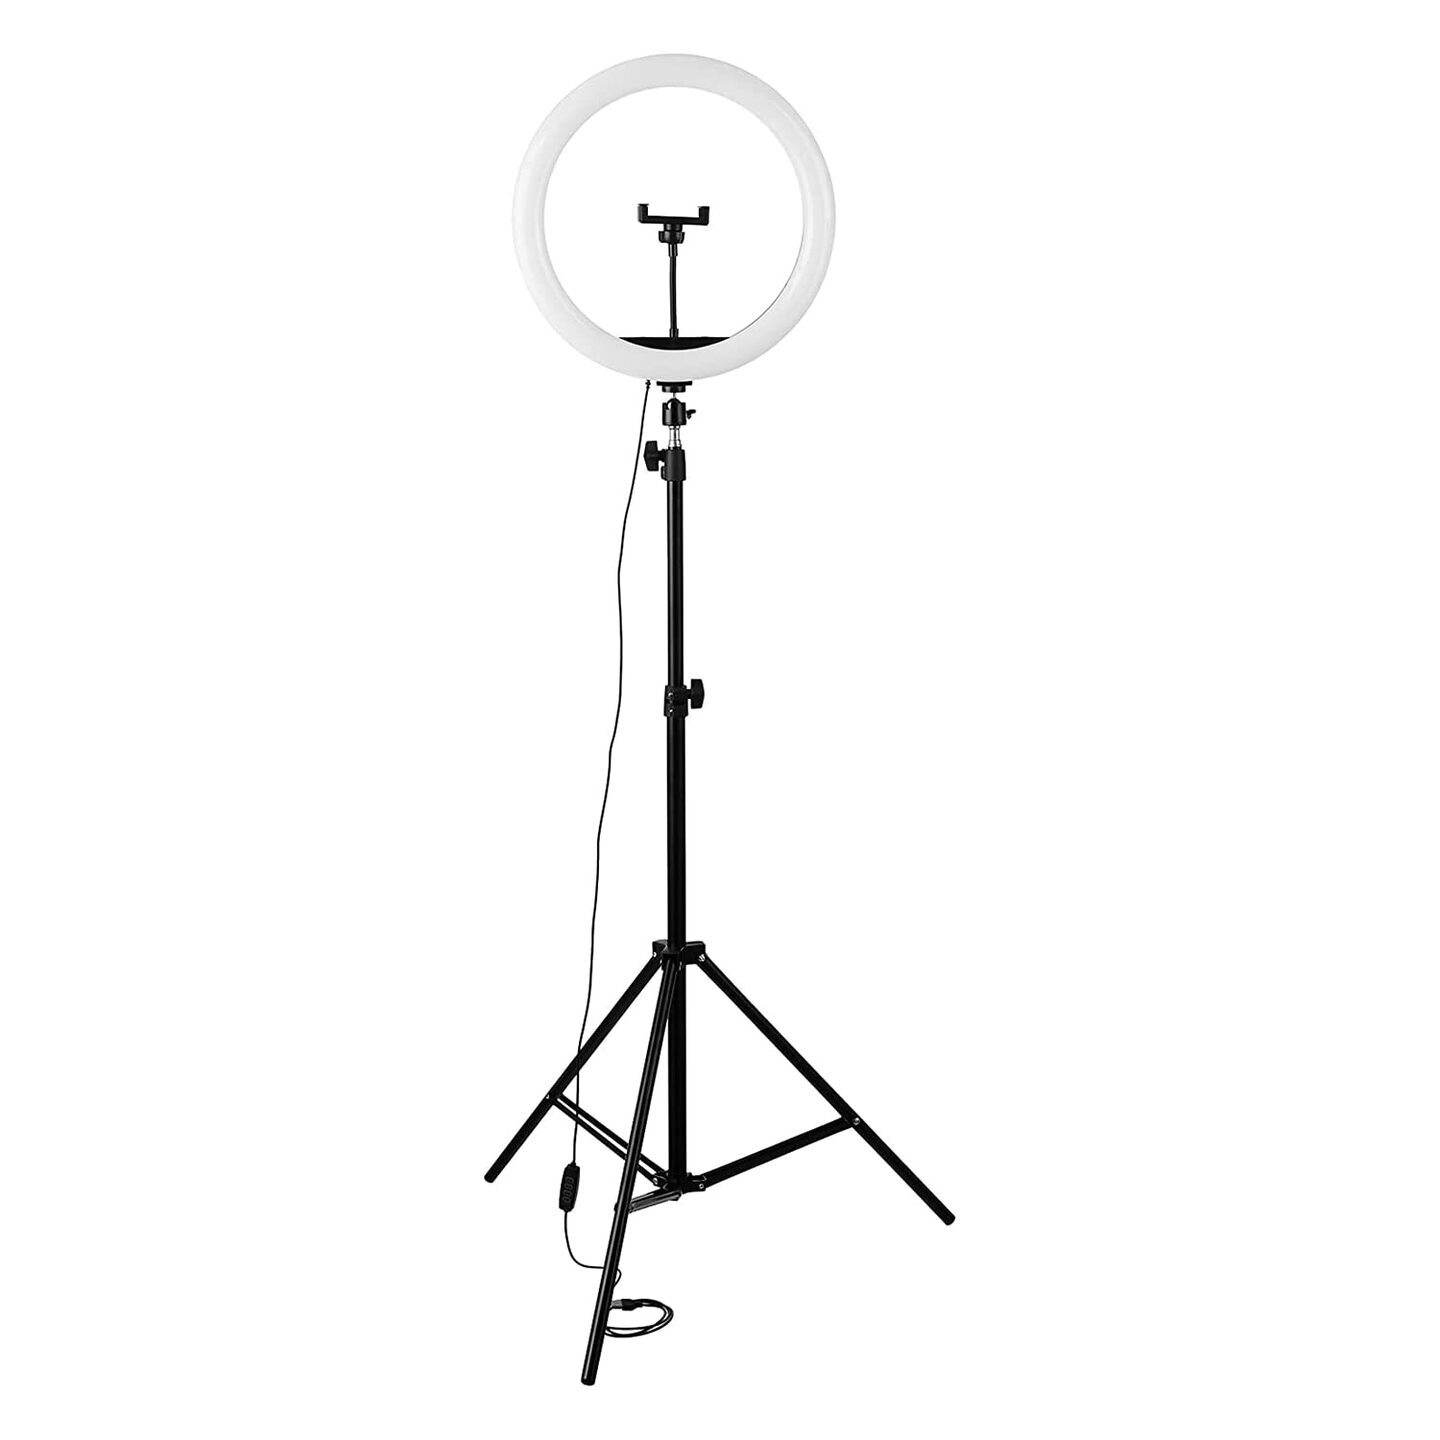 10 Inches LED Ring Light with Tripod for YouTube Video Shooting / Makeup